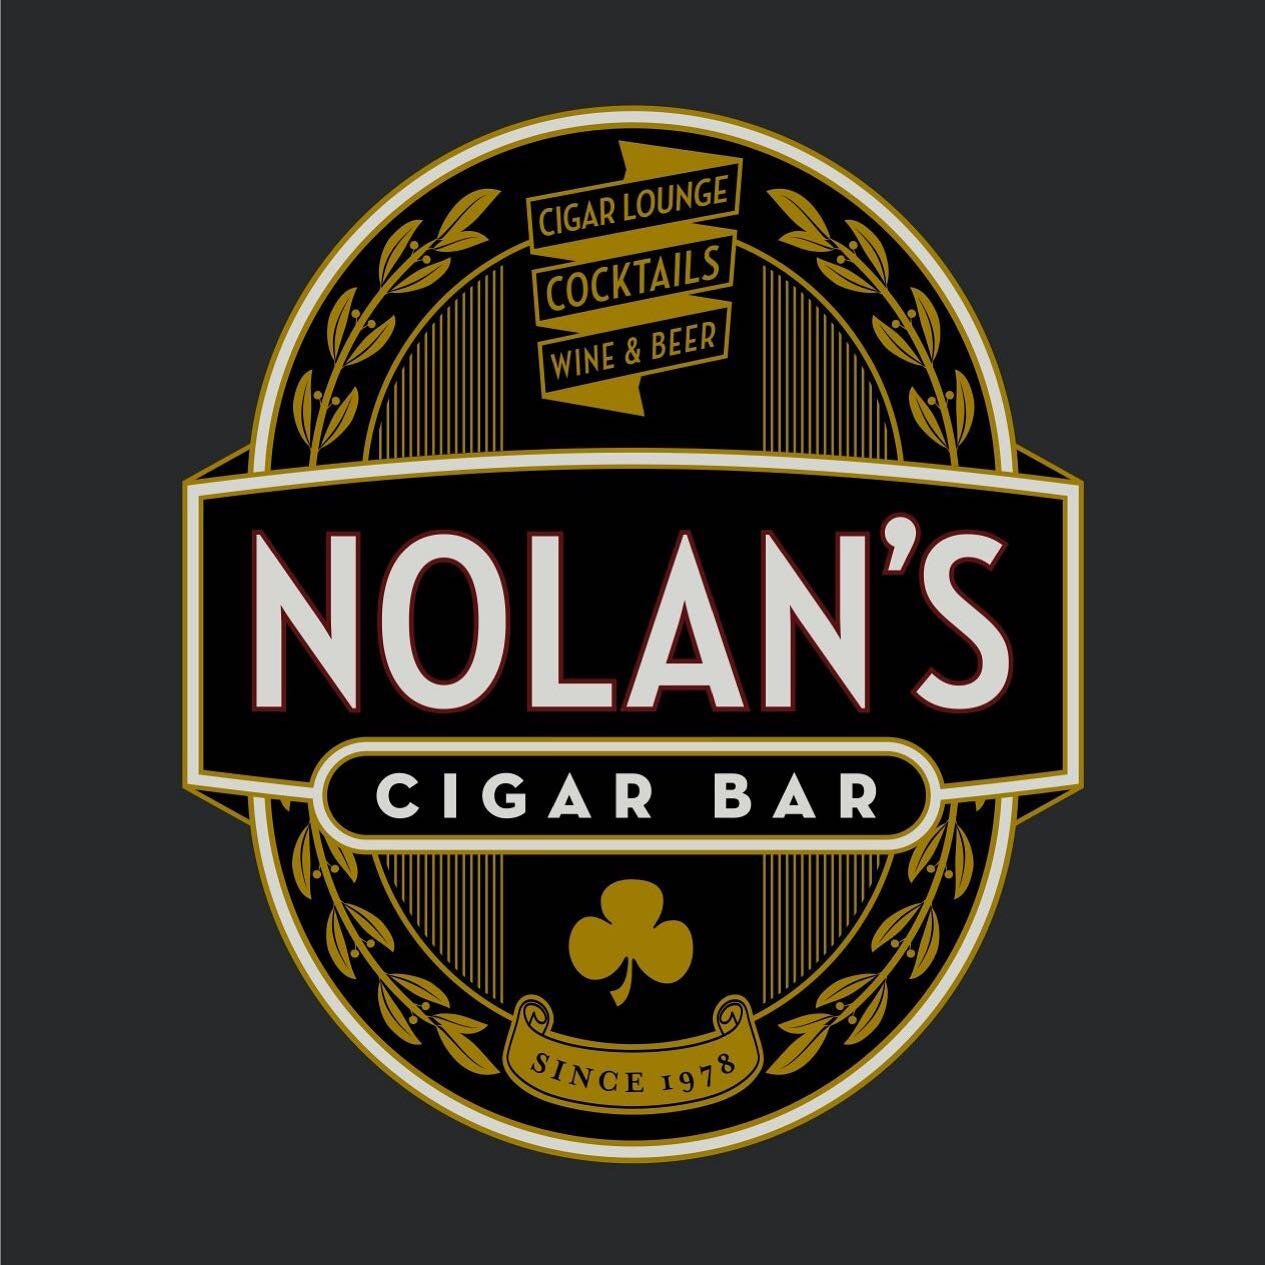 Thank you @nolanscigarbar for joining us as a sponsor for the inaugural @heroescuptc!
#gtresort #heroescupgolf